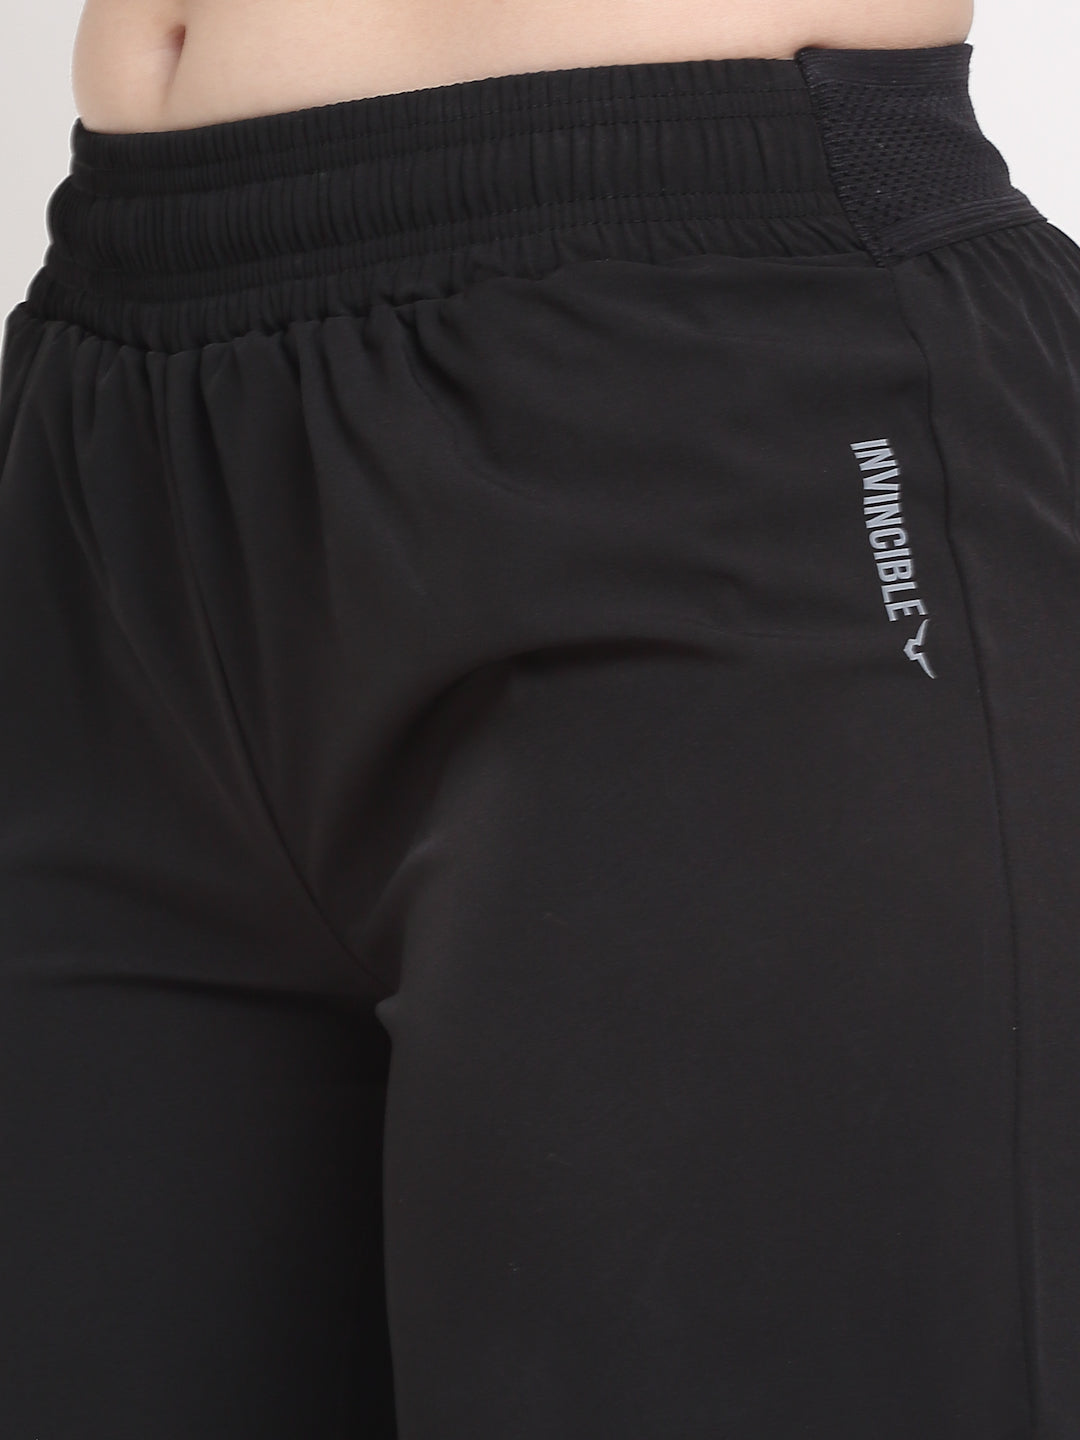 Invincible Women's Breathable Training Shorts